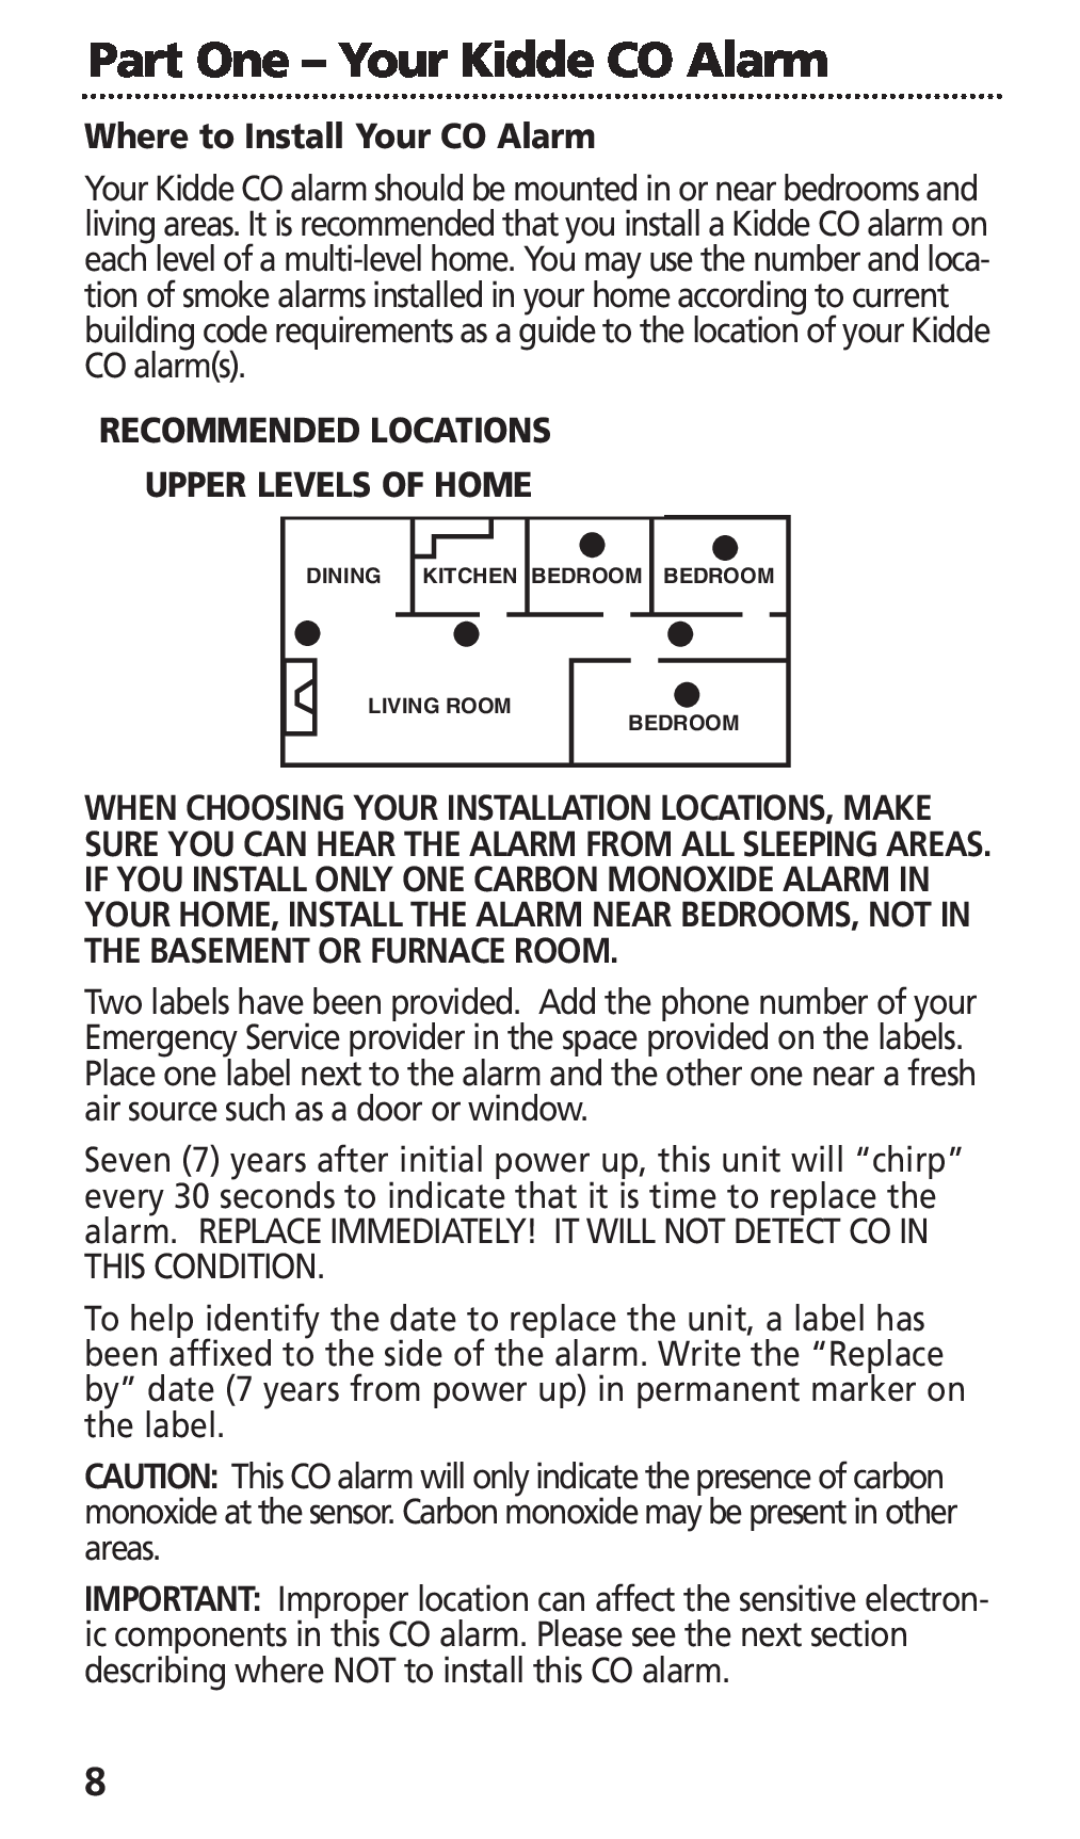 Kidde KN-COB-DP-H, KN-COB-LCB-A manual Where to Install Your CO Alarm, Recommended Locations Upper Levels Of Home, Bedroom 